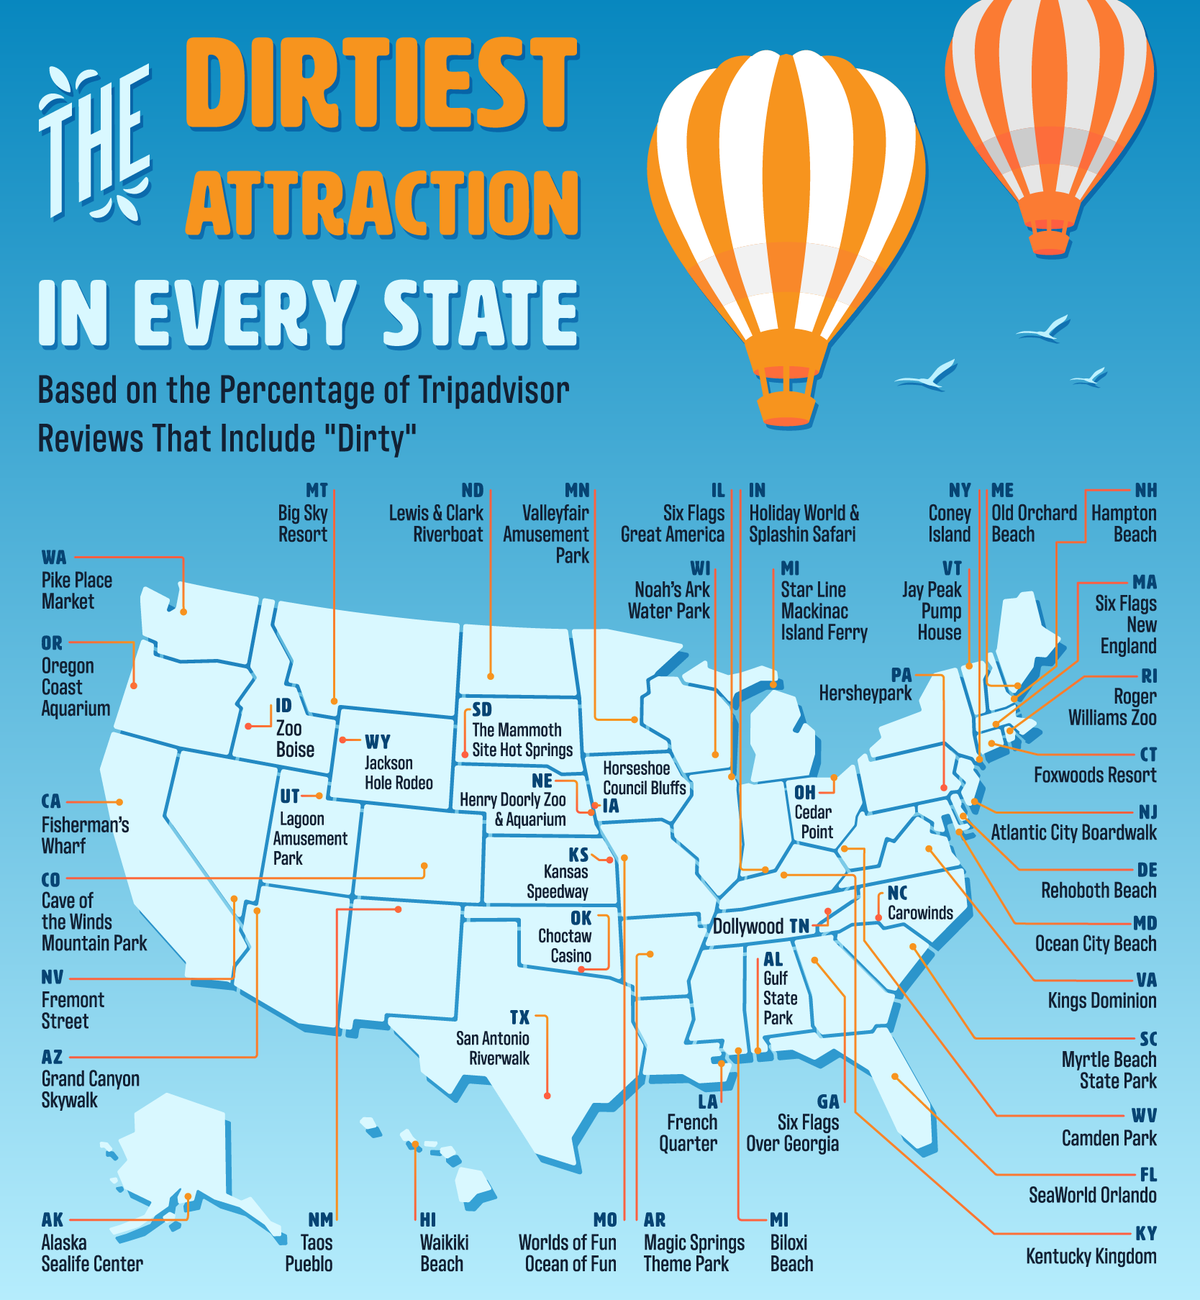 U.S. map plotting out the dirtiest tourist attraction in each state.